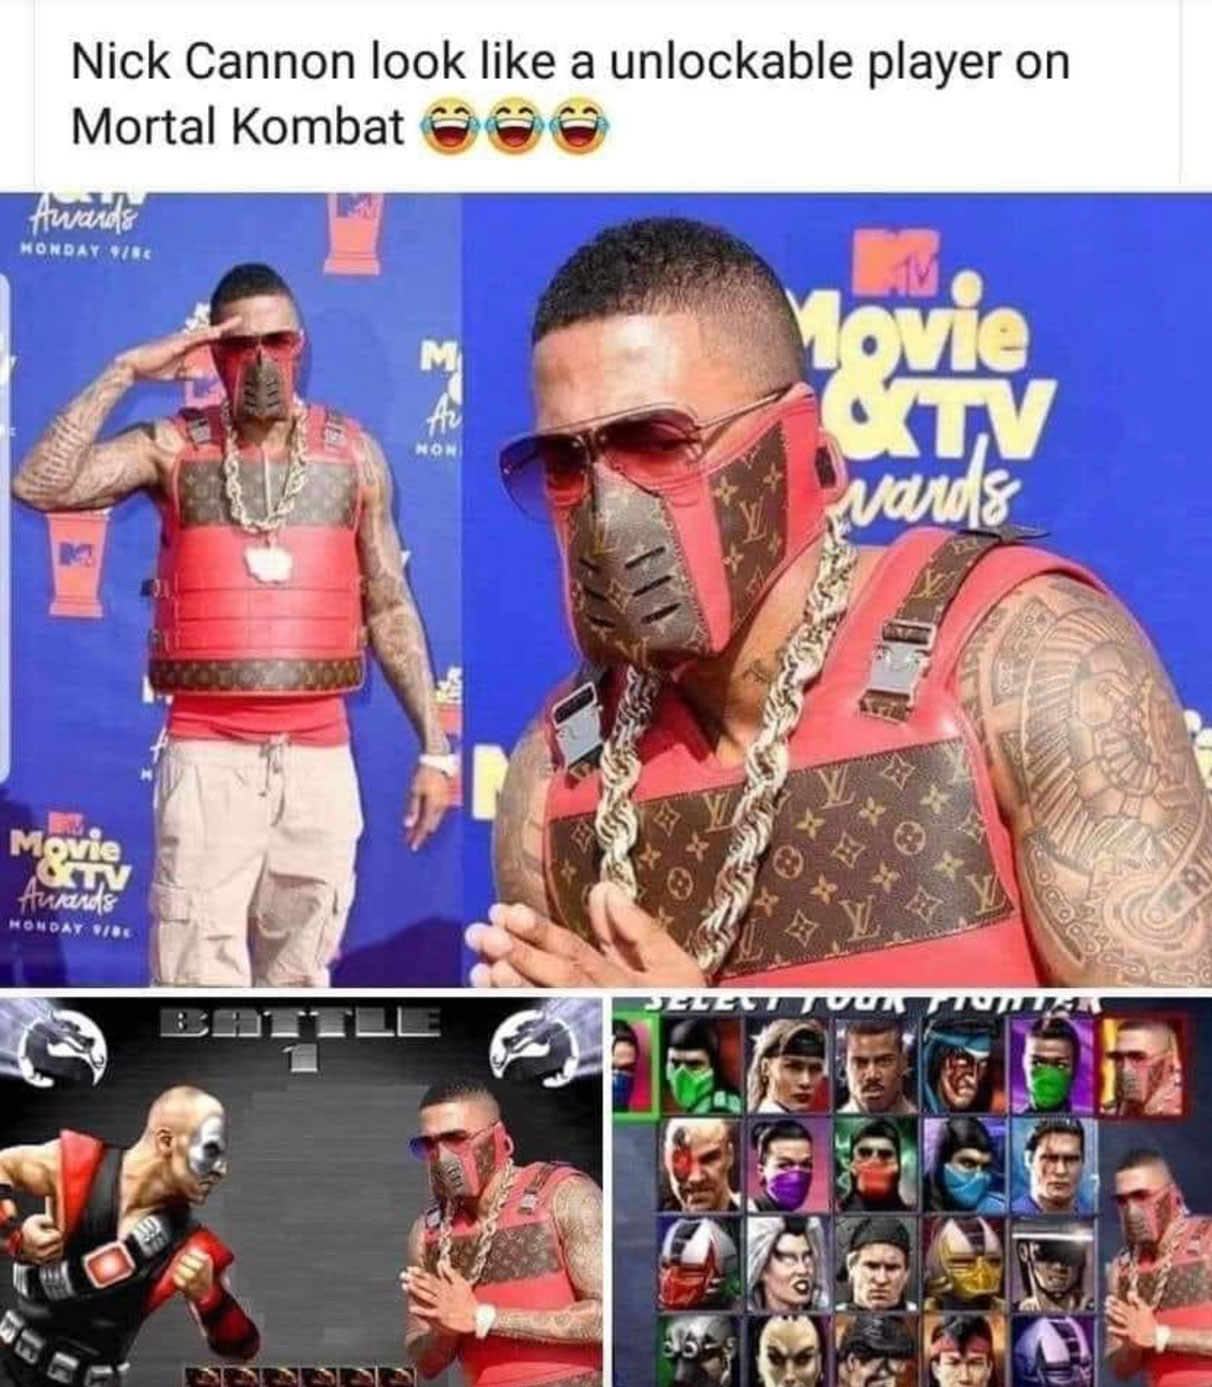 funny gaming memes  - nick cannon gang - Nick Cannon look a unlockable player on Mortal Kombat Awards Monday Vir M Au Movie Non 4 wards Re Movie Atv Ausands Al Monday To Jelut Tuunti Inne